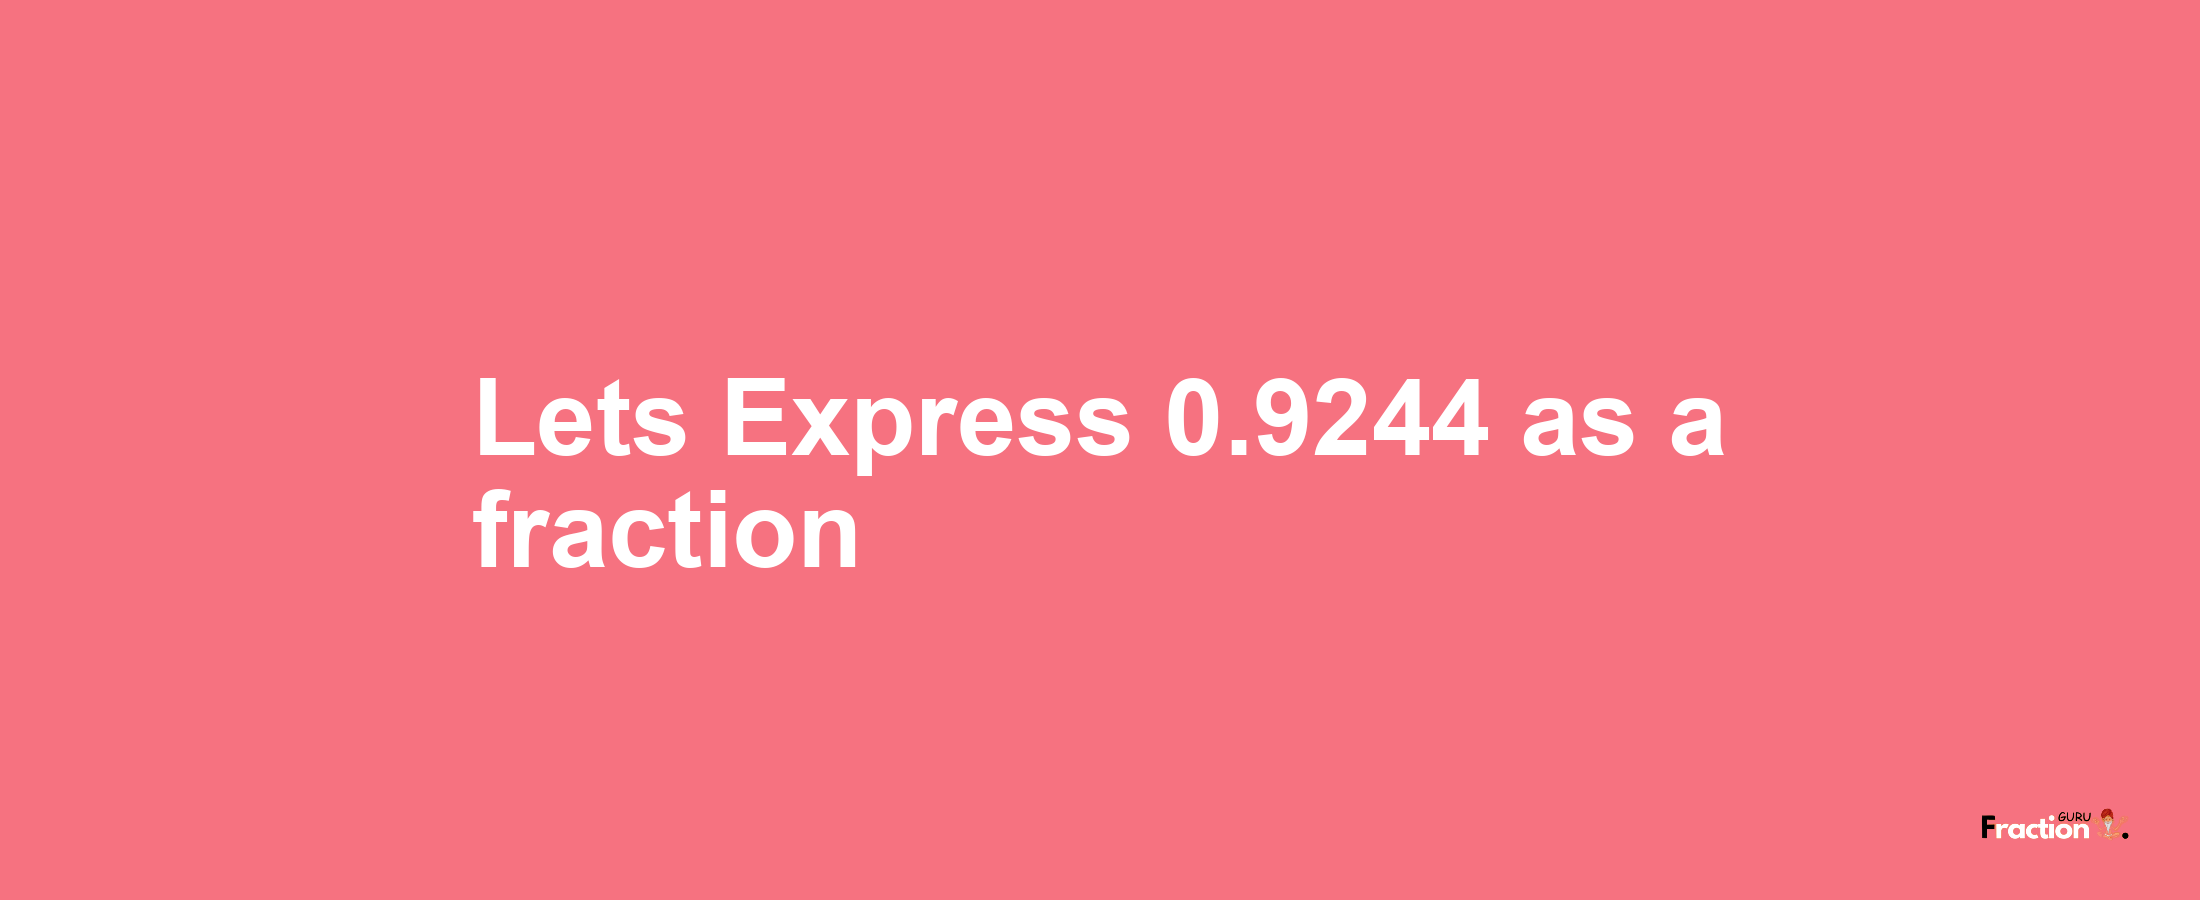 Lets Express 0.9244 as afraction